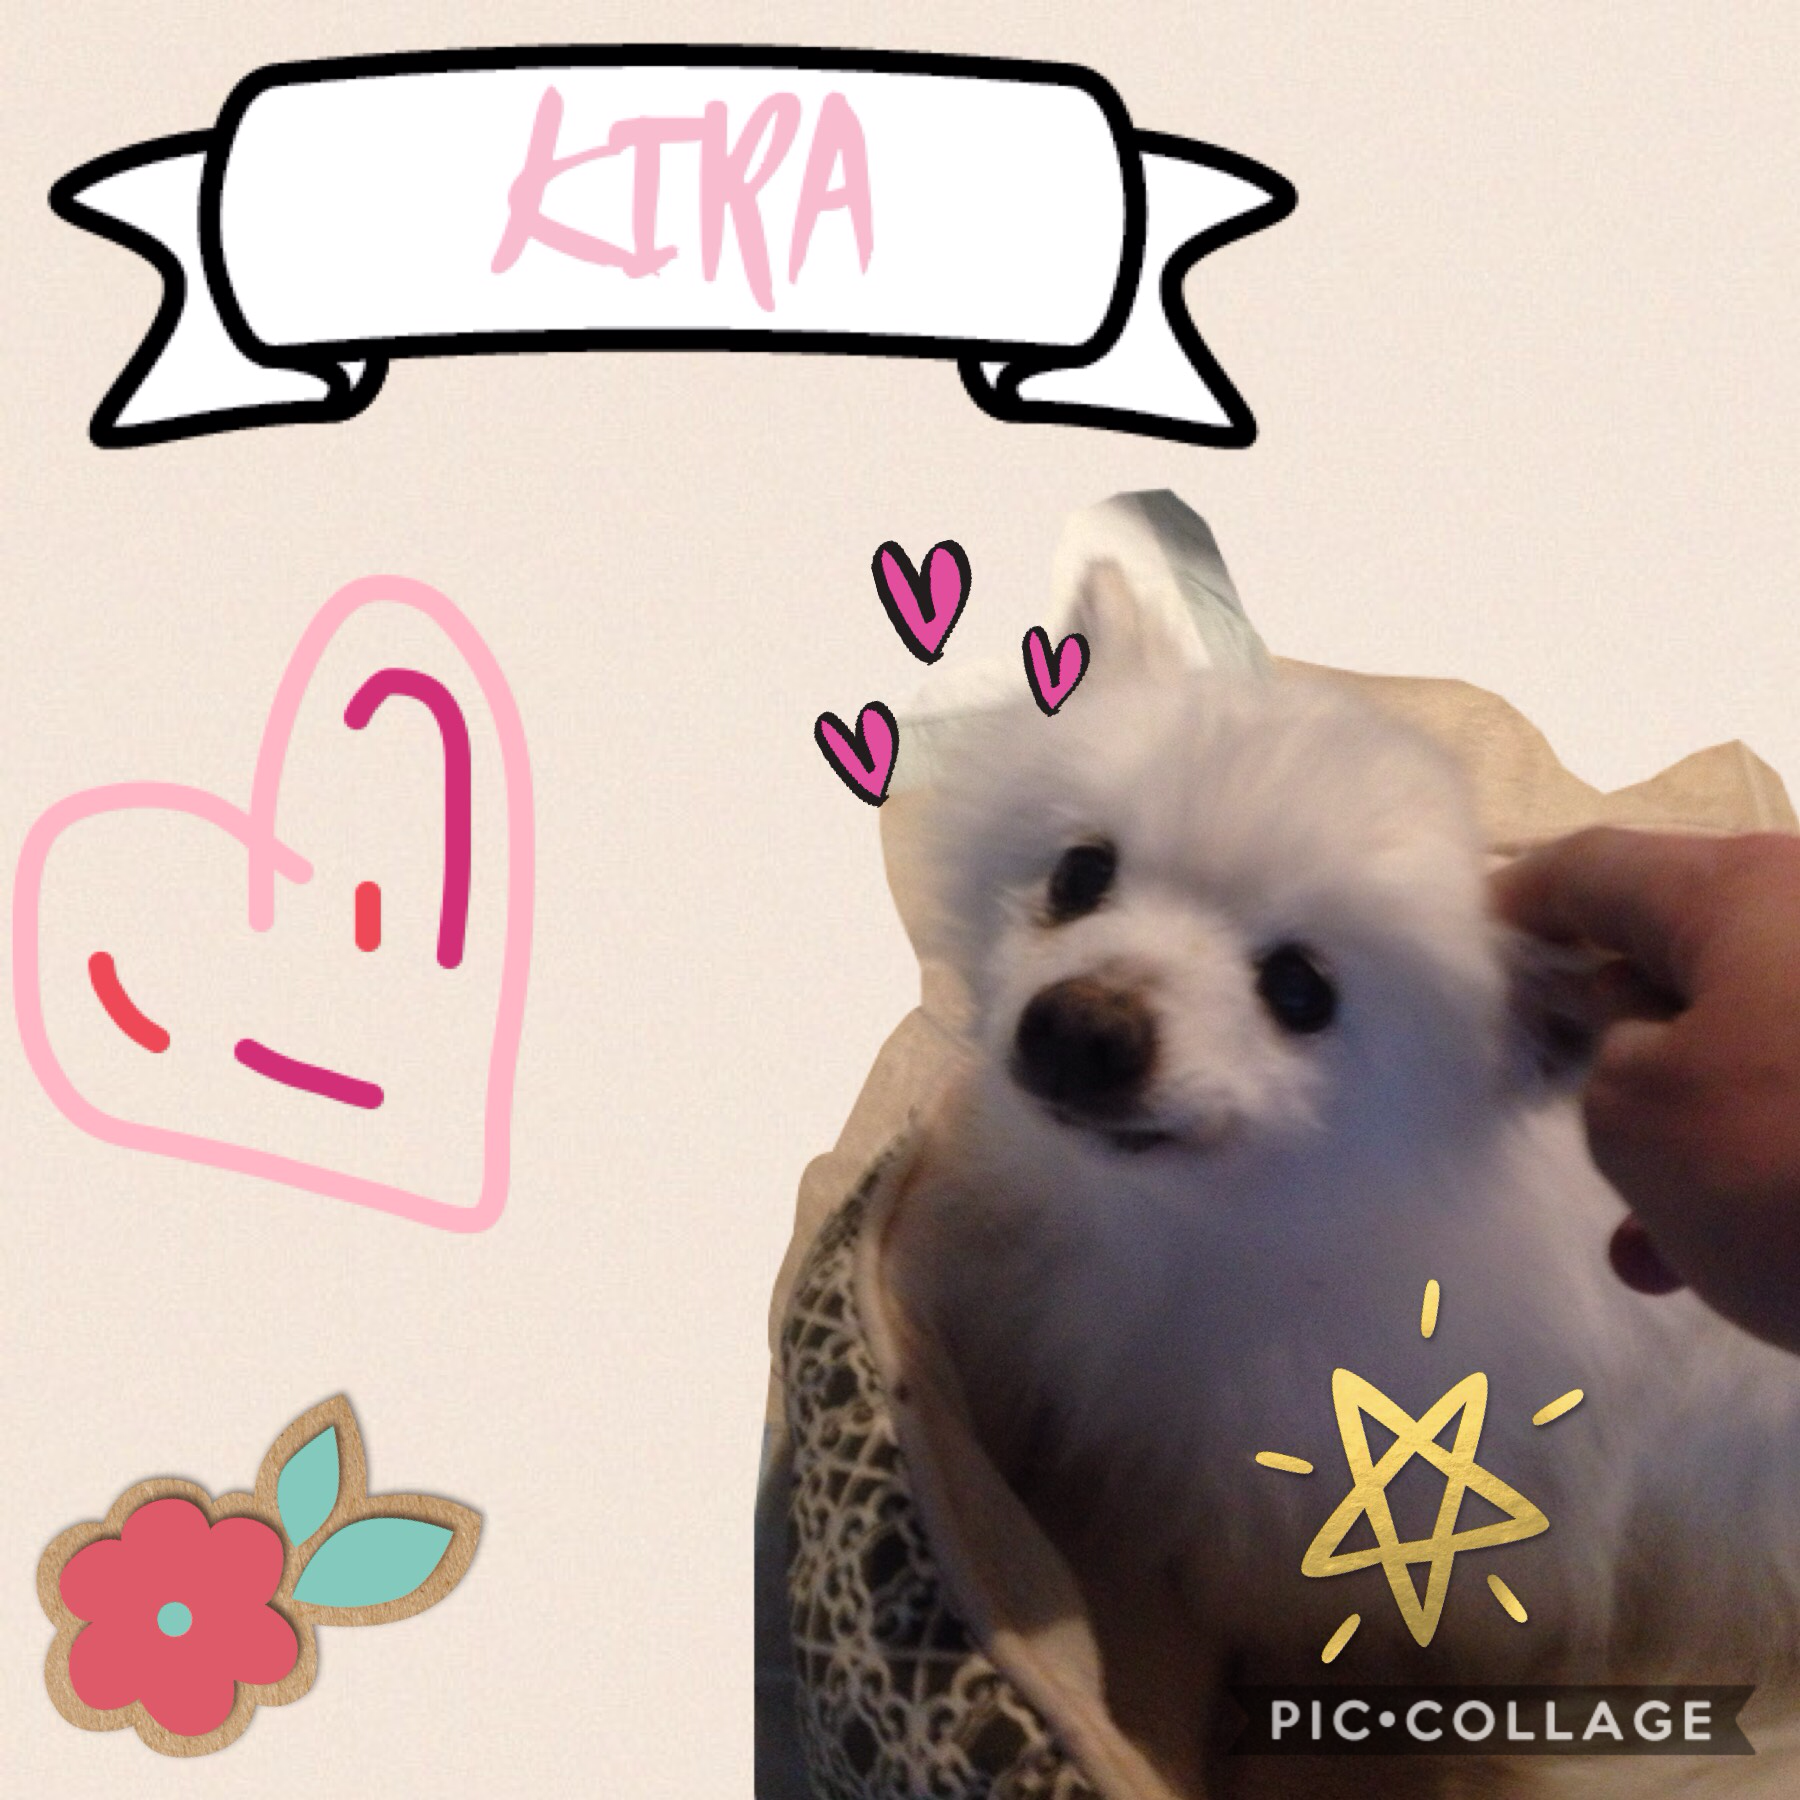 ⭐️Kira⭐️ forever and always ♥️ 